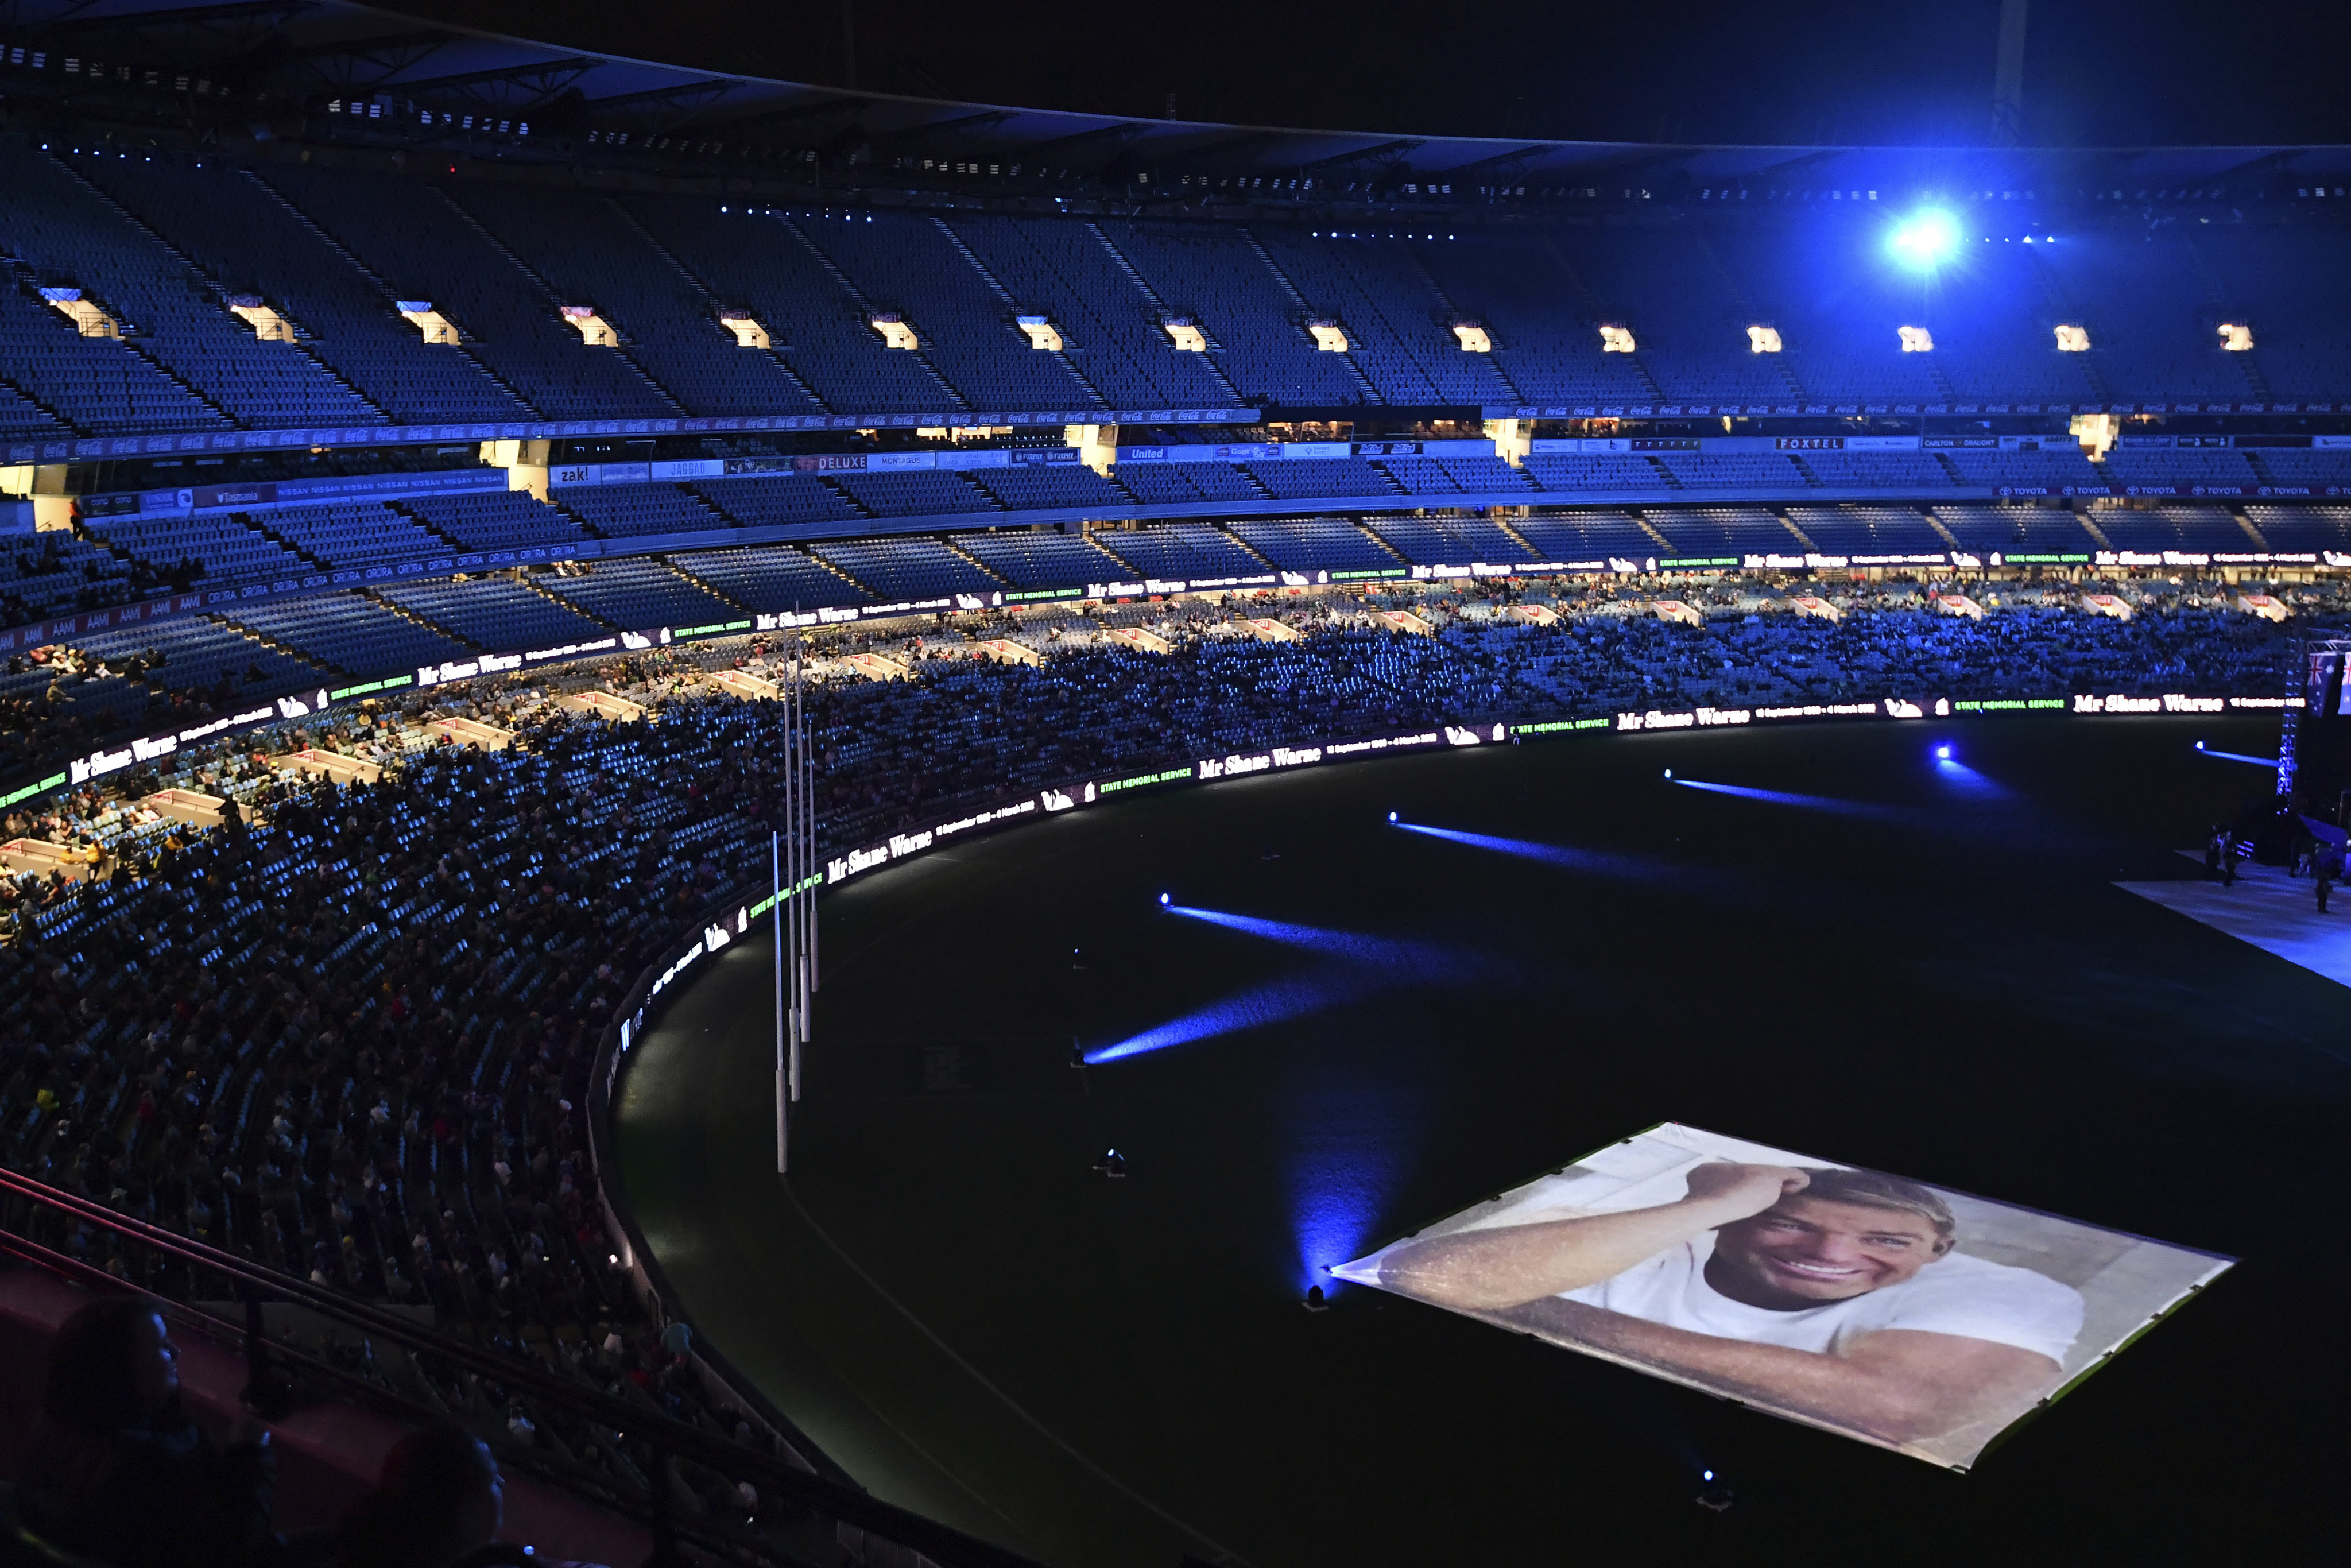 Images are projected on the ground during a memorial service for Shane Warne at the Melbourne Cricket Ground in Melbourne, Australia, on Wednesday. Warne, widely regarded as one of the top cricket players of all time, died on March 4 while on vacation with friends in Thailand. Photo: AAP Image via AP